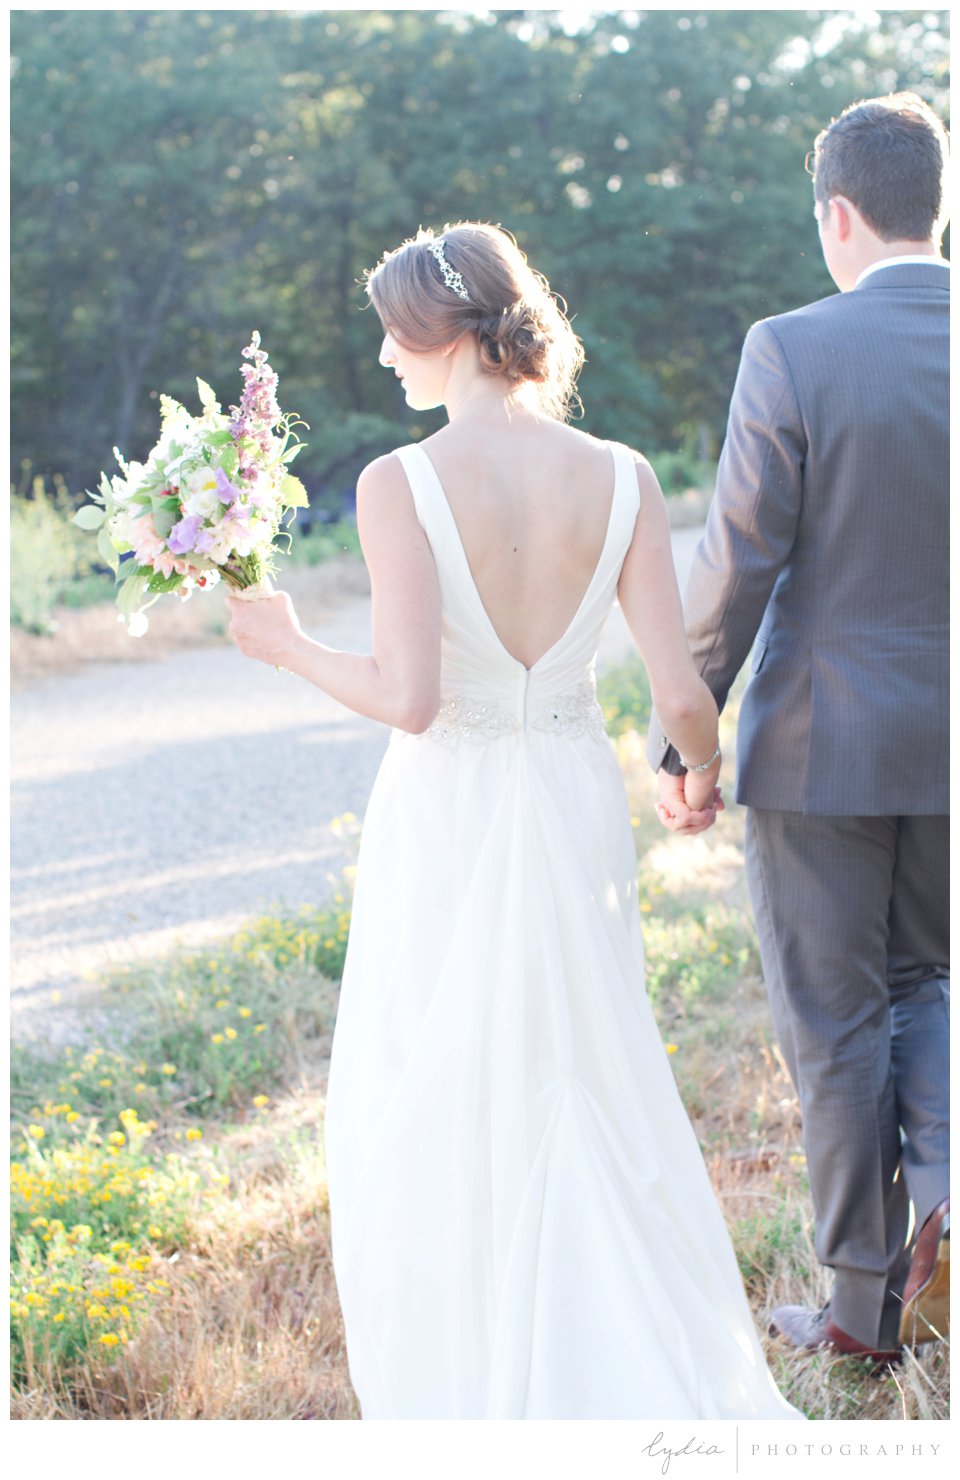 Bride holding bouquet and walking with groom at Lucchesi Vineyards wedding in Grass Valley, California.